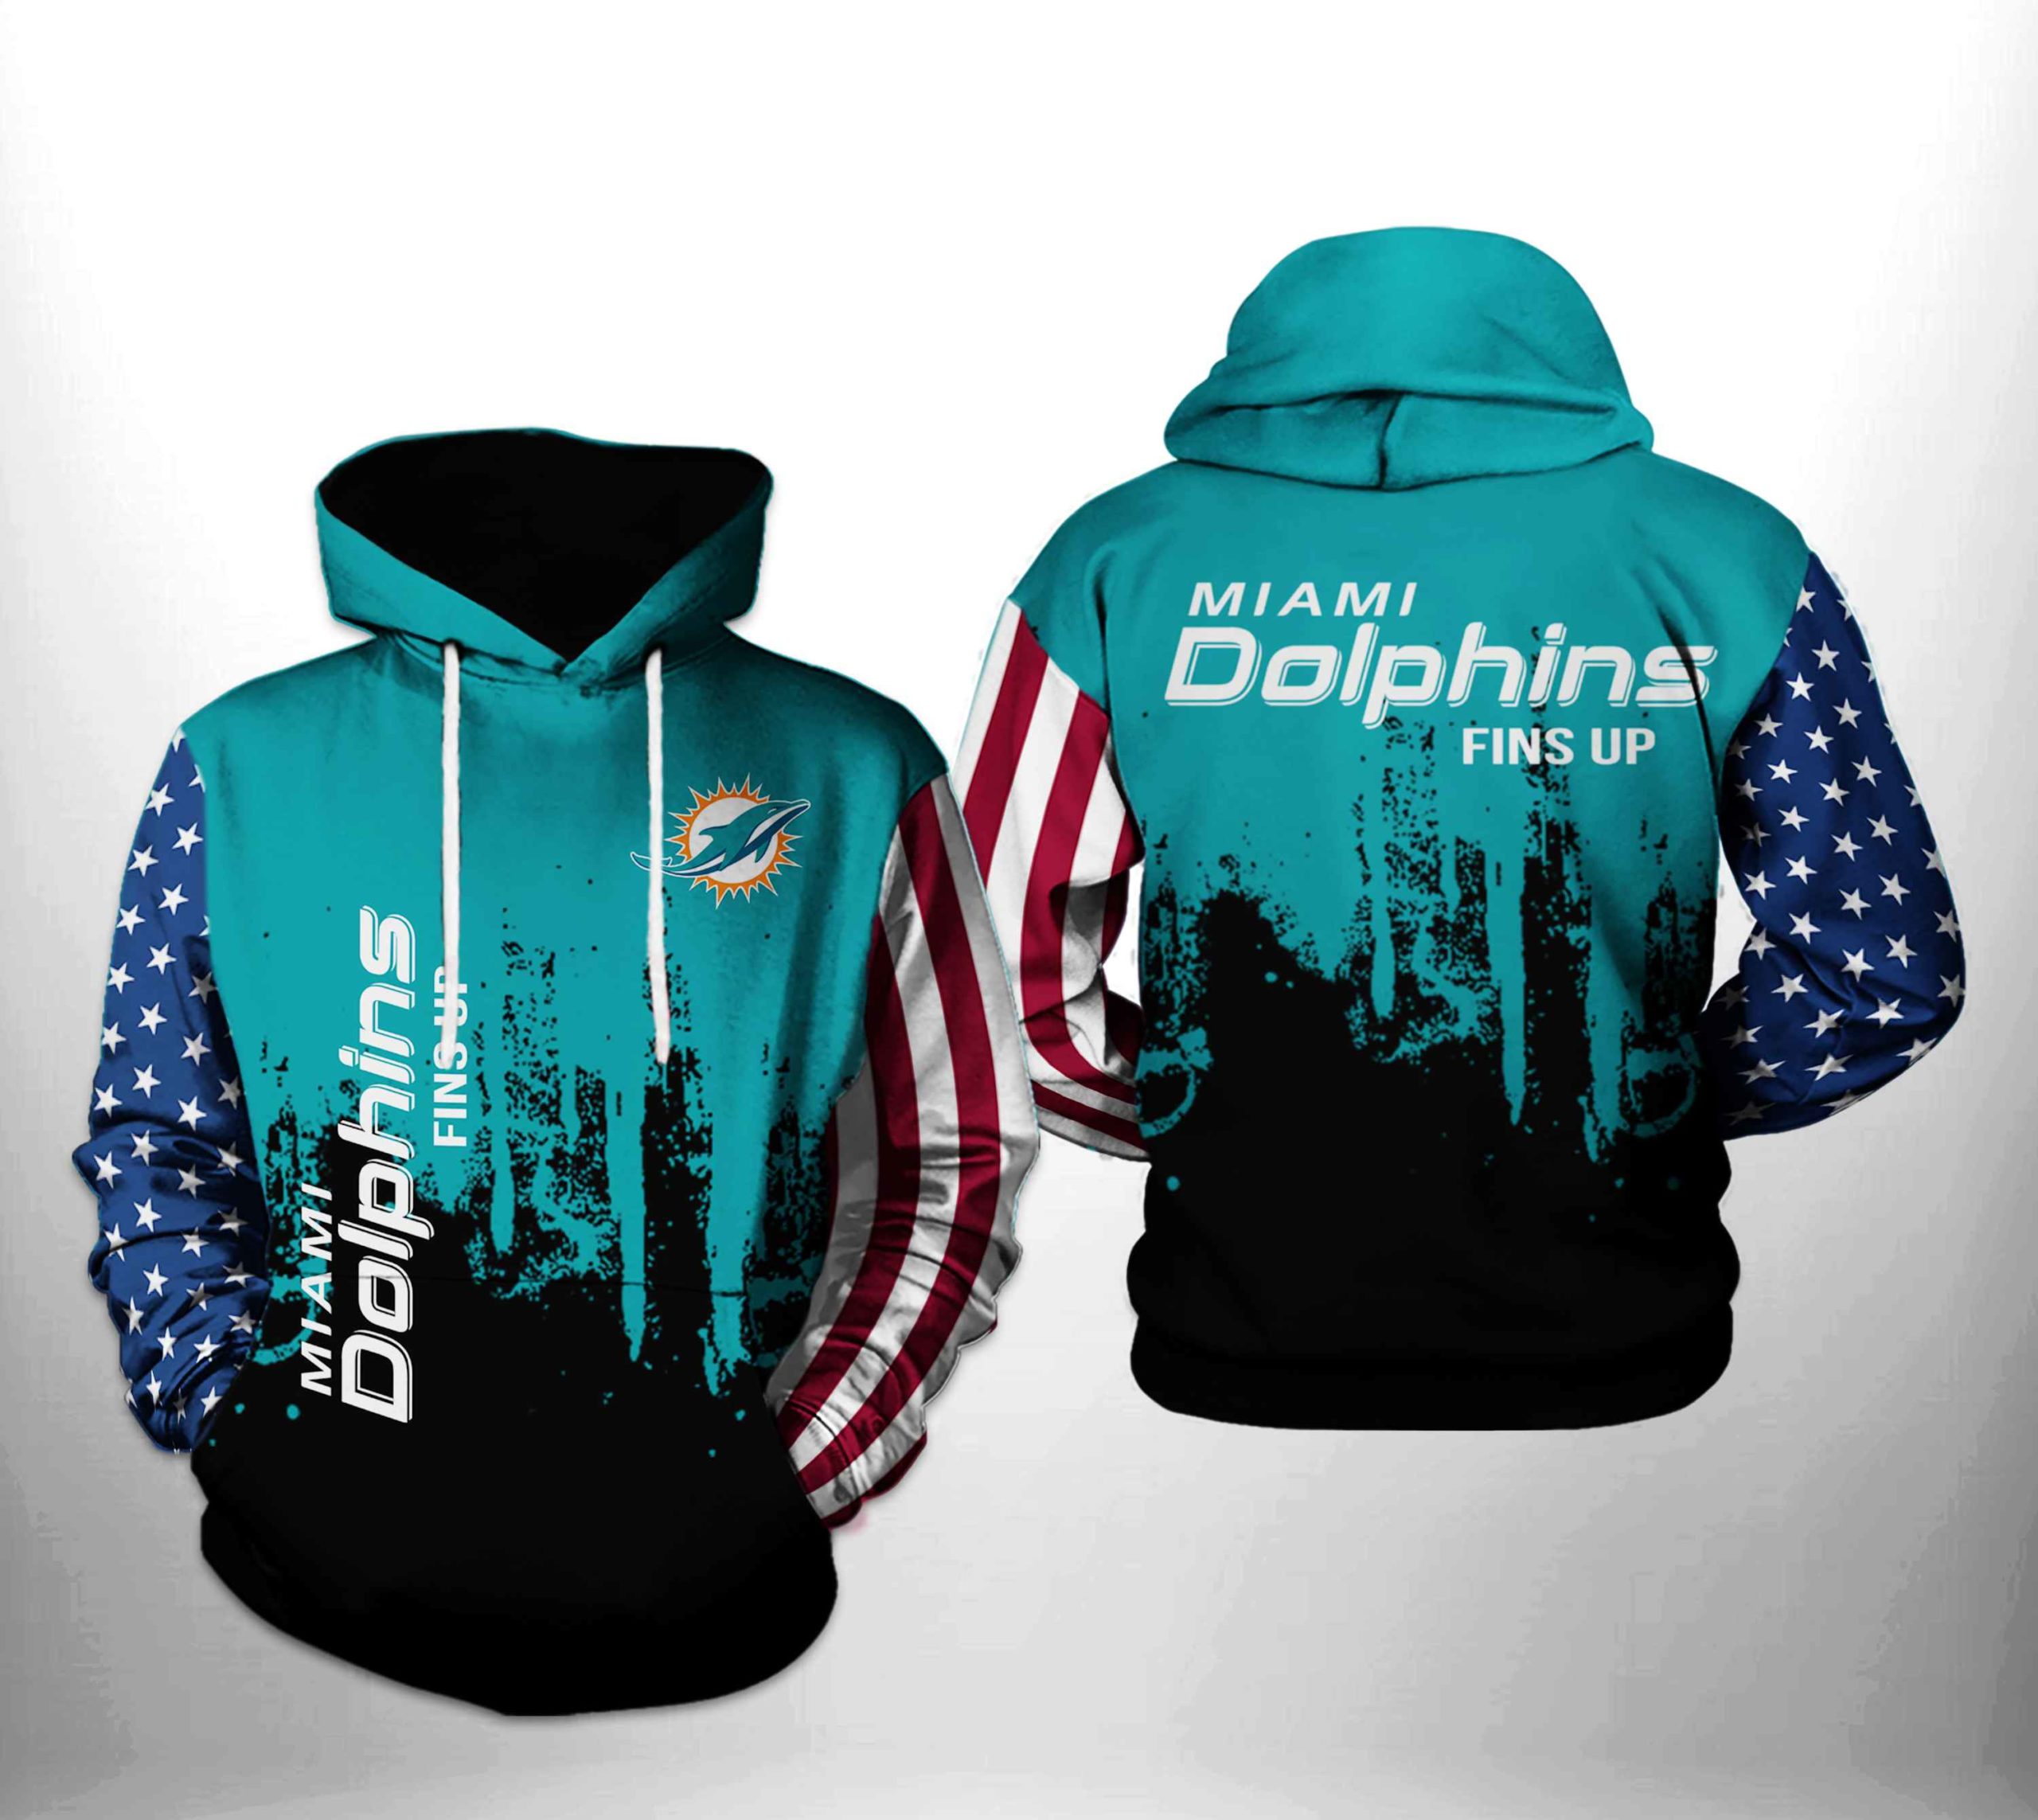 Miami Dolphins Shop - Miami Dolphins NFL Team US 3D Printed HoodieZipper Hoodie